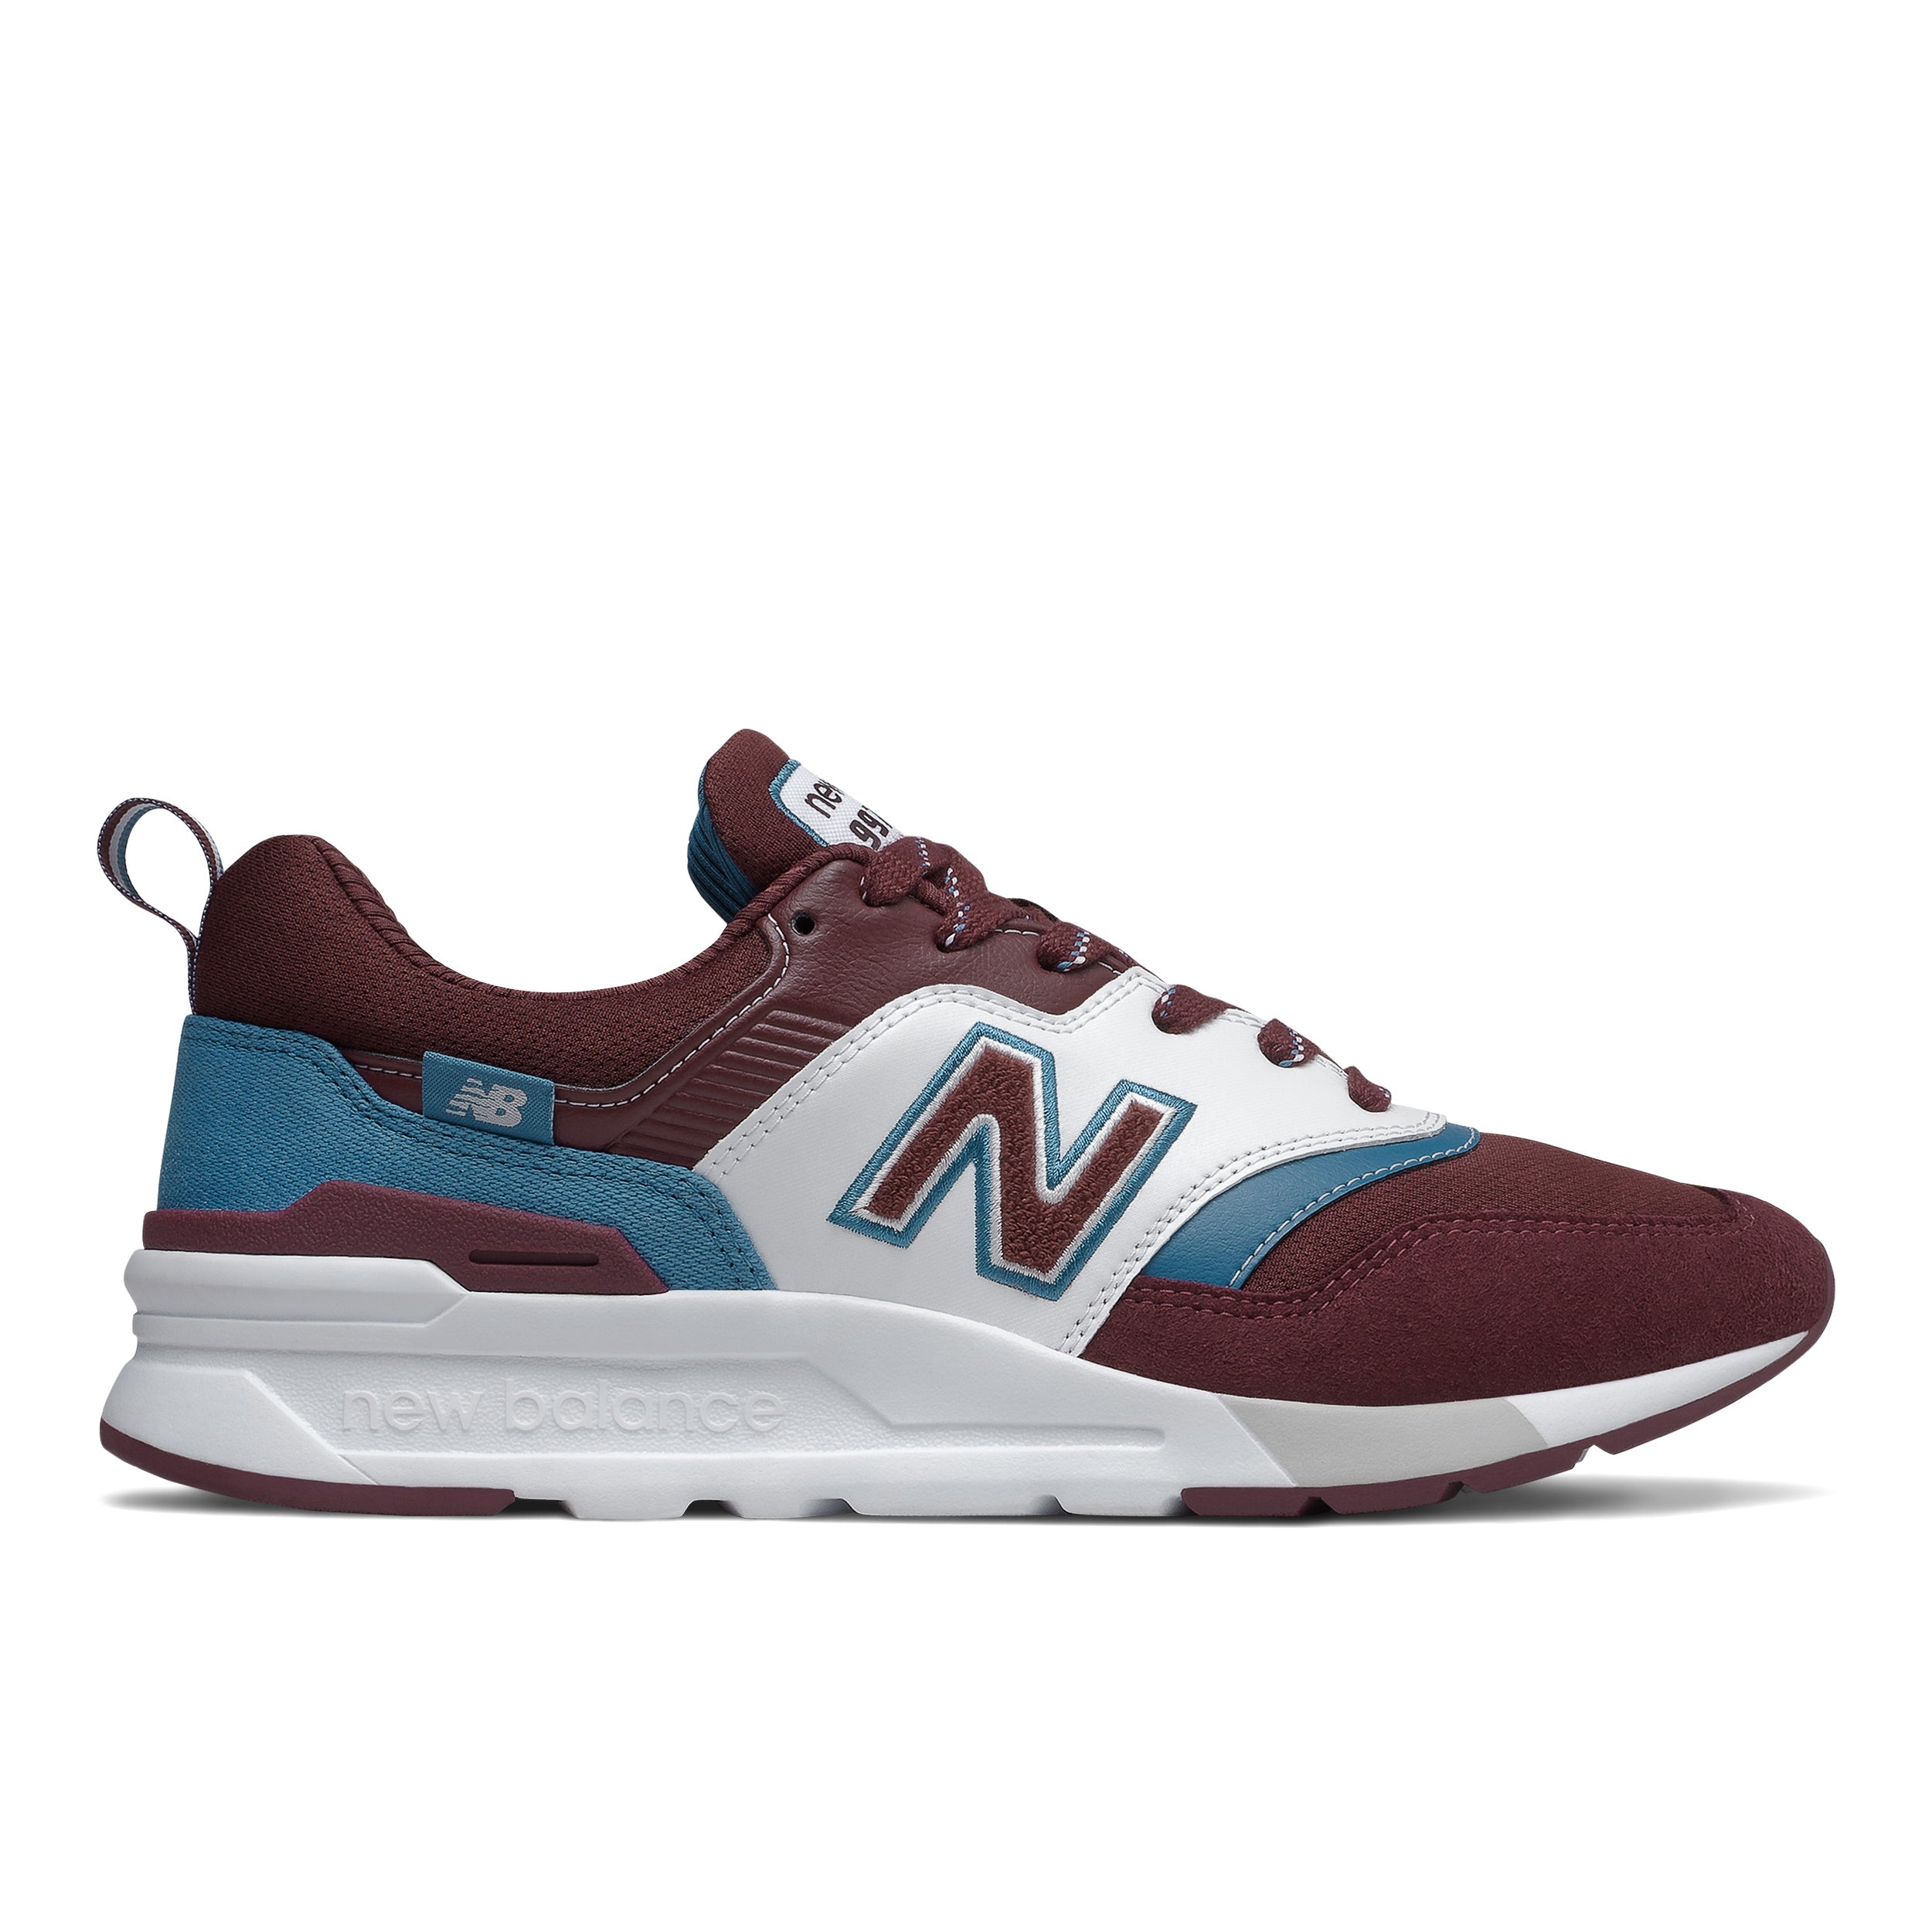 New 997 Burgundy Tennis Shoes In – InStyle-Tuscaloosa